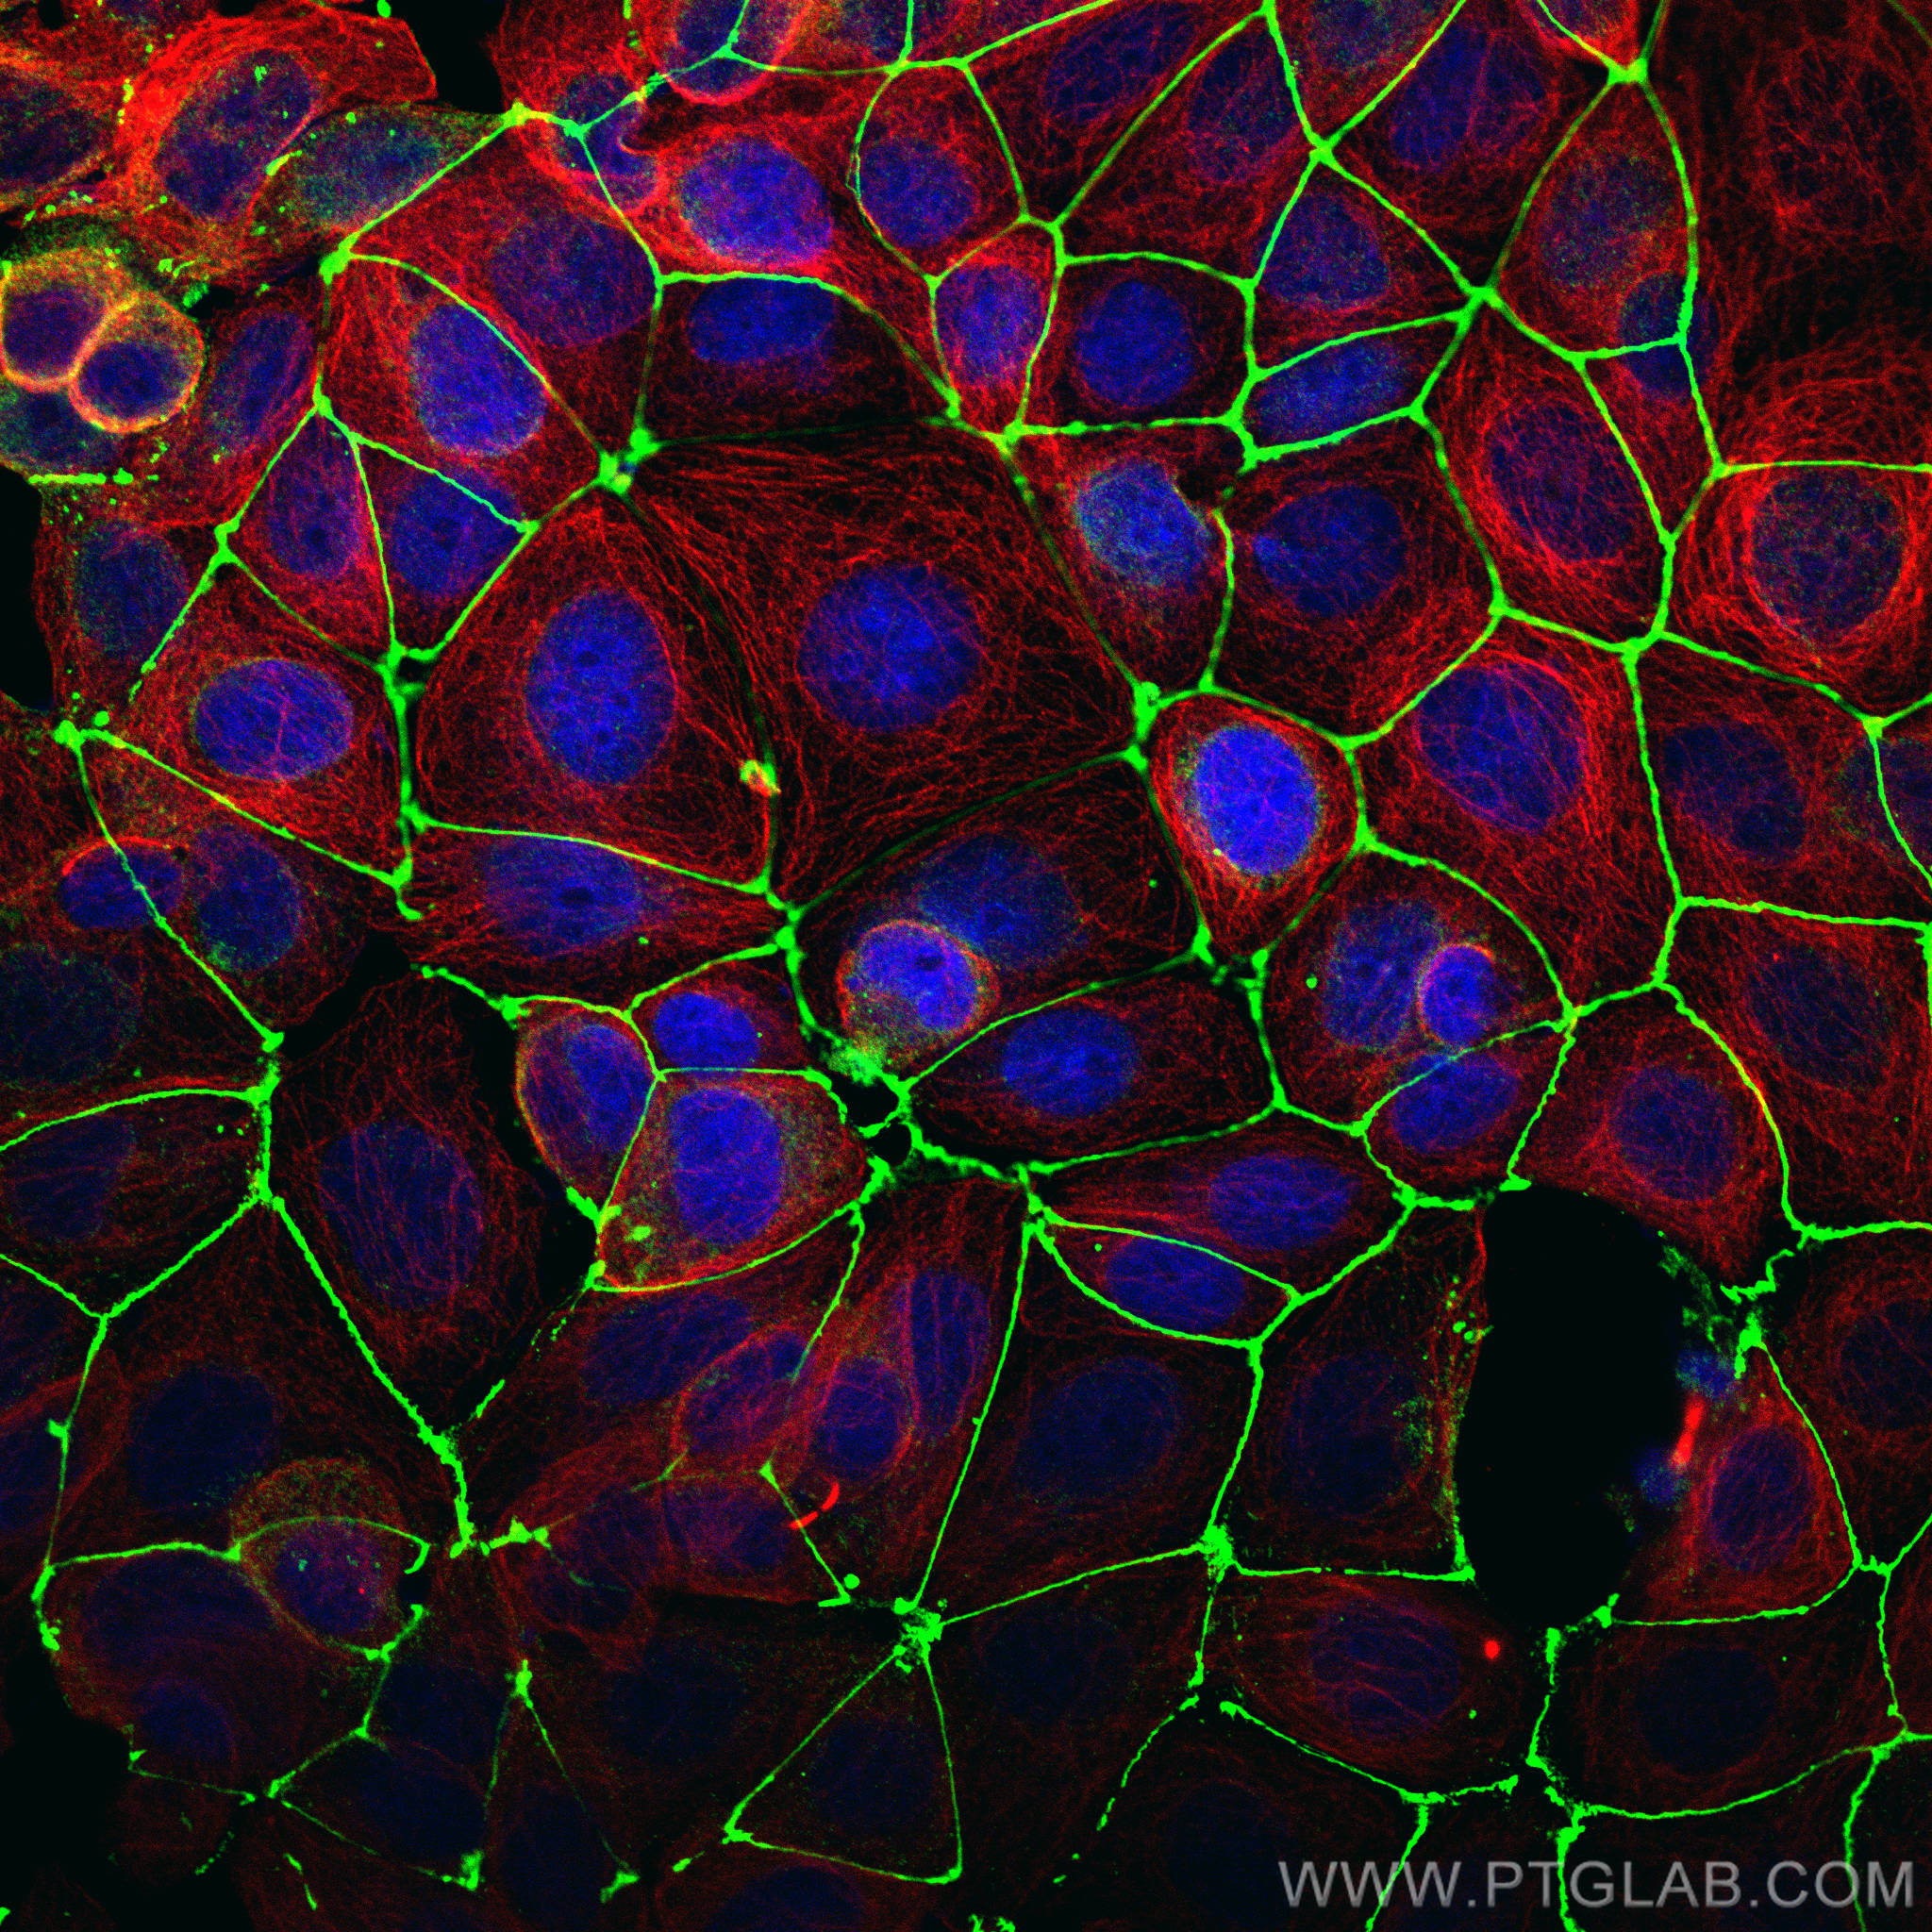 Immunofluorescence of MCF-7 cells: MCF-7 cells were fixed with 4% PFA and stained with Rabbit anti-ZO1 polyclonal antibody (21773-1-AP, 1:2000, green) and mouse anti-Alpha Tubulin monoclonal antibody (66031-1-Ig, 1:1000, red). Multi-rAb CoraLite® Plus 488-Goat Anti-Rabbit Recombinant Secondary Antibody (H+L) (RGAR002, 1:500) and Multi-rAb CoraLite® Plus 594-Goat Anti-Mouse Recombinant Secondary Antibody (H+L) (RGAM004, 1:500) were used for detection. 